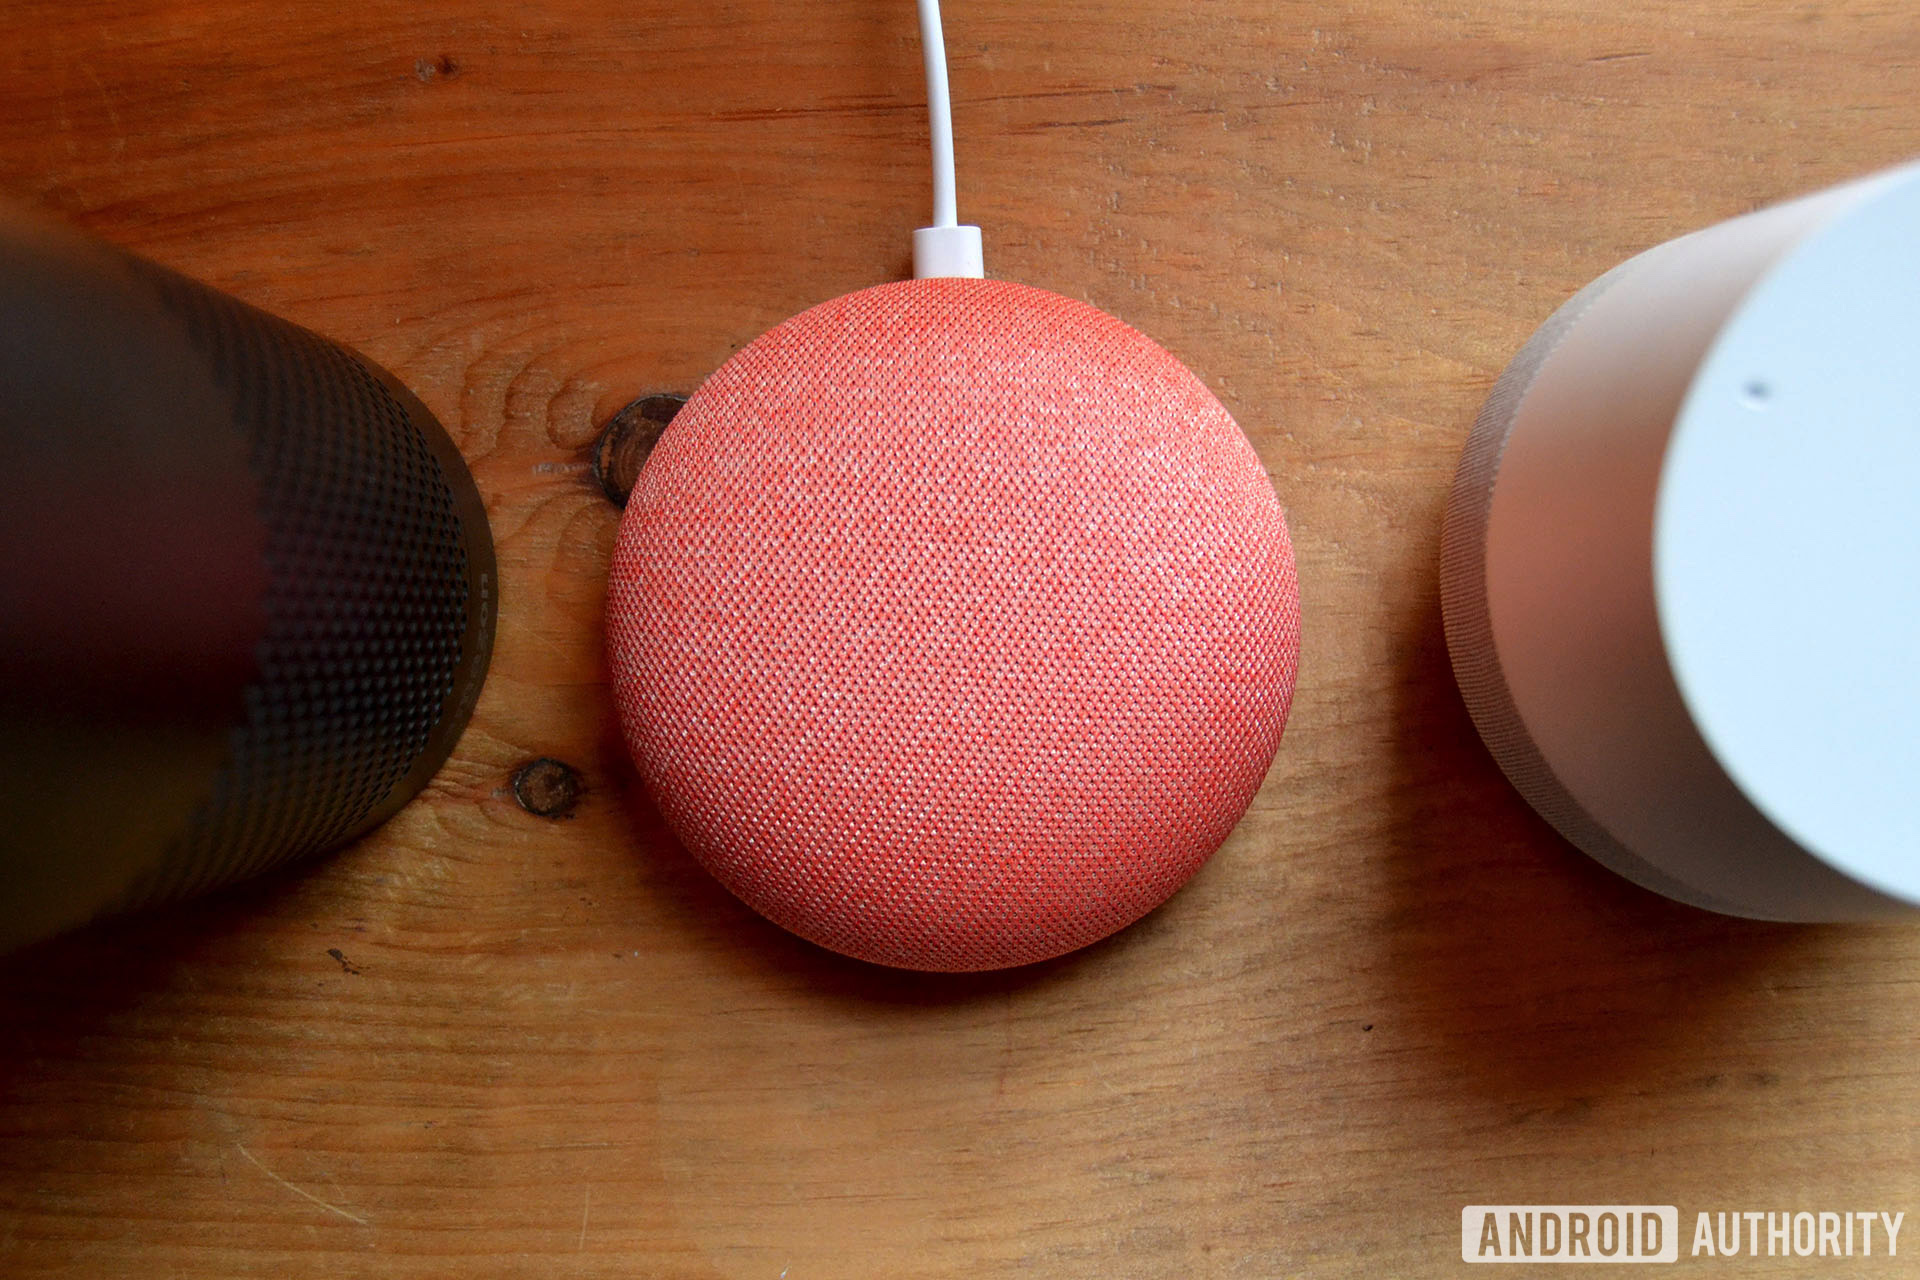 Amazon Tap, Google Home mini and Google Home speakers -  Google Home privacy